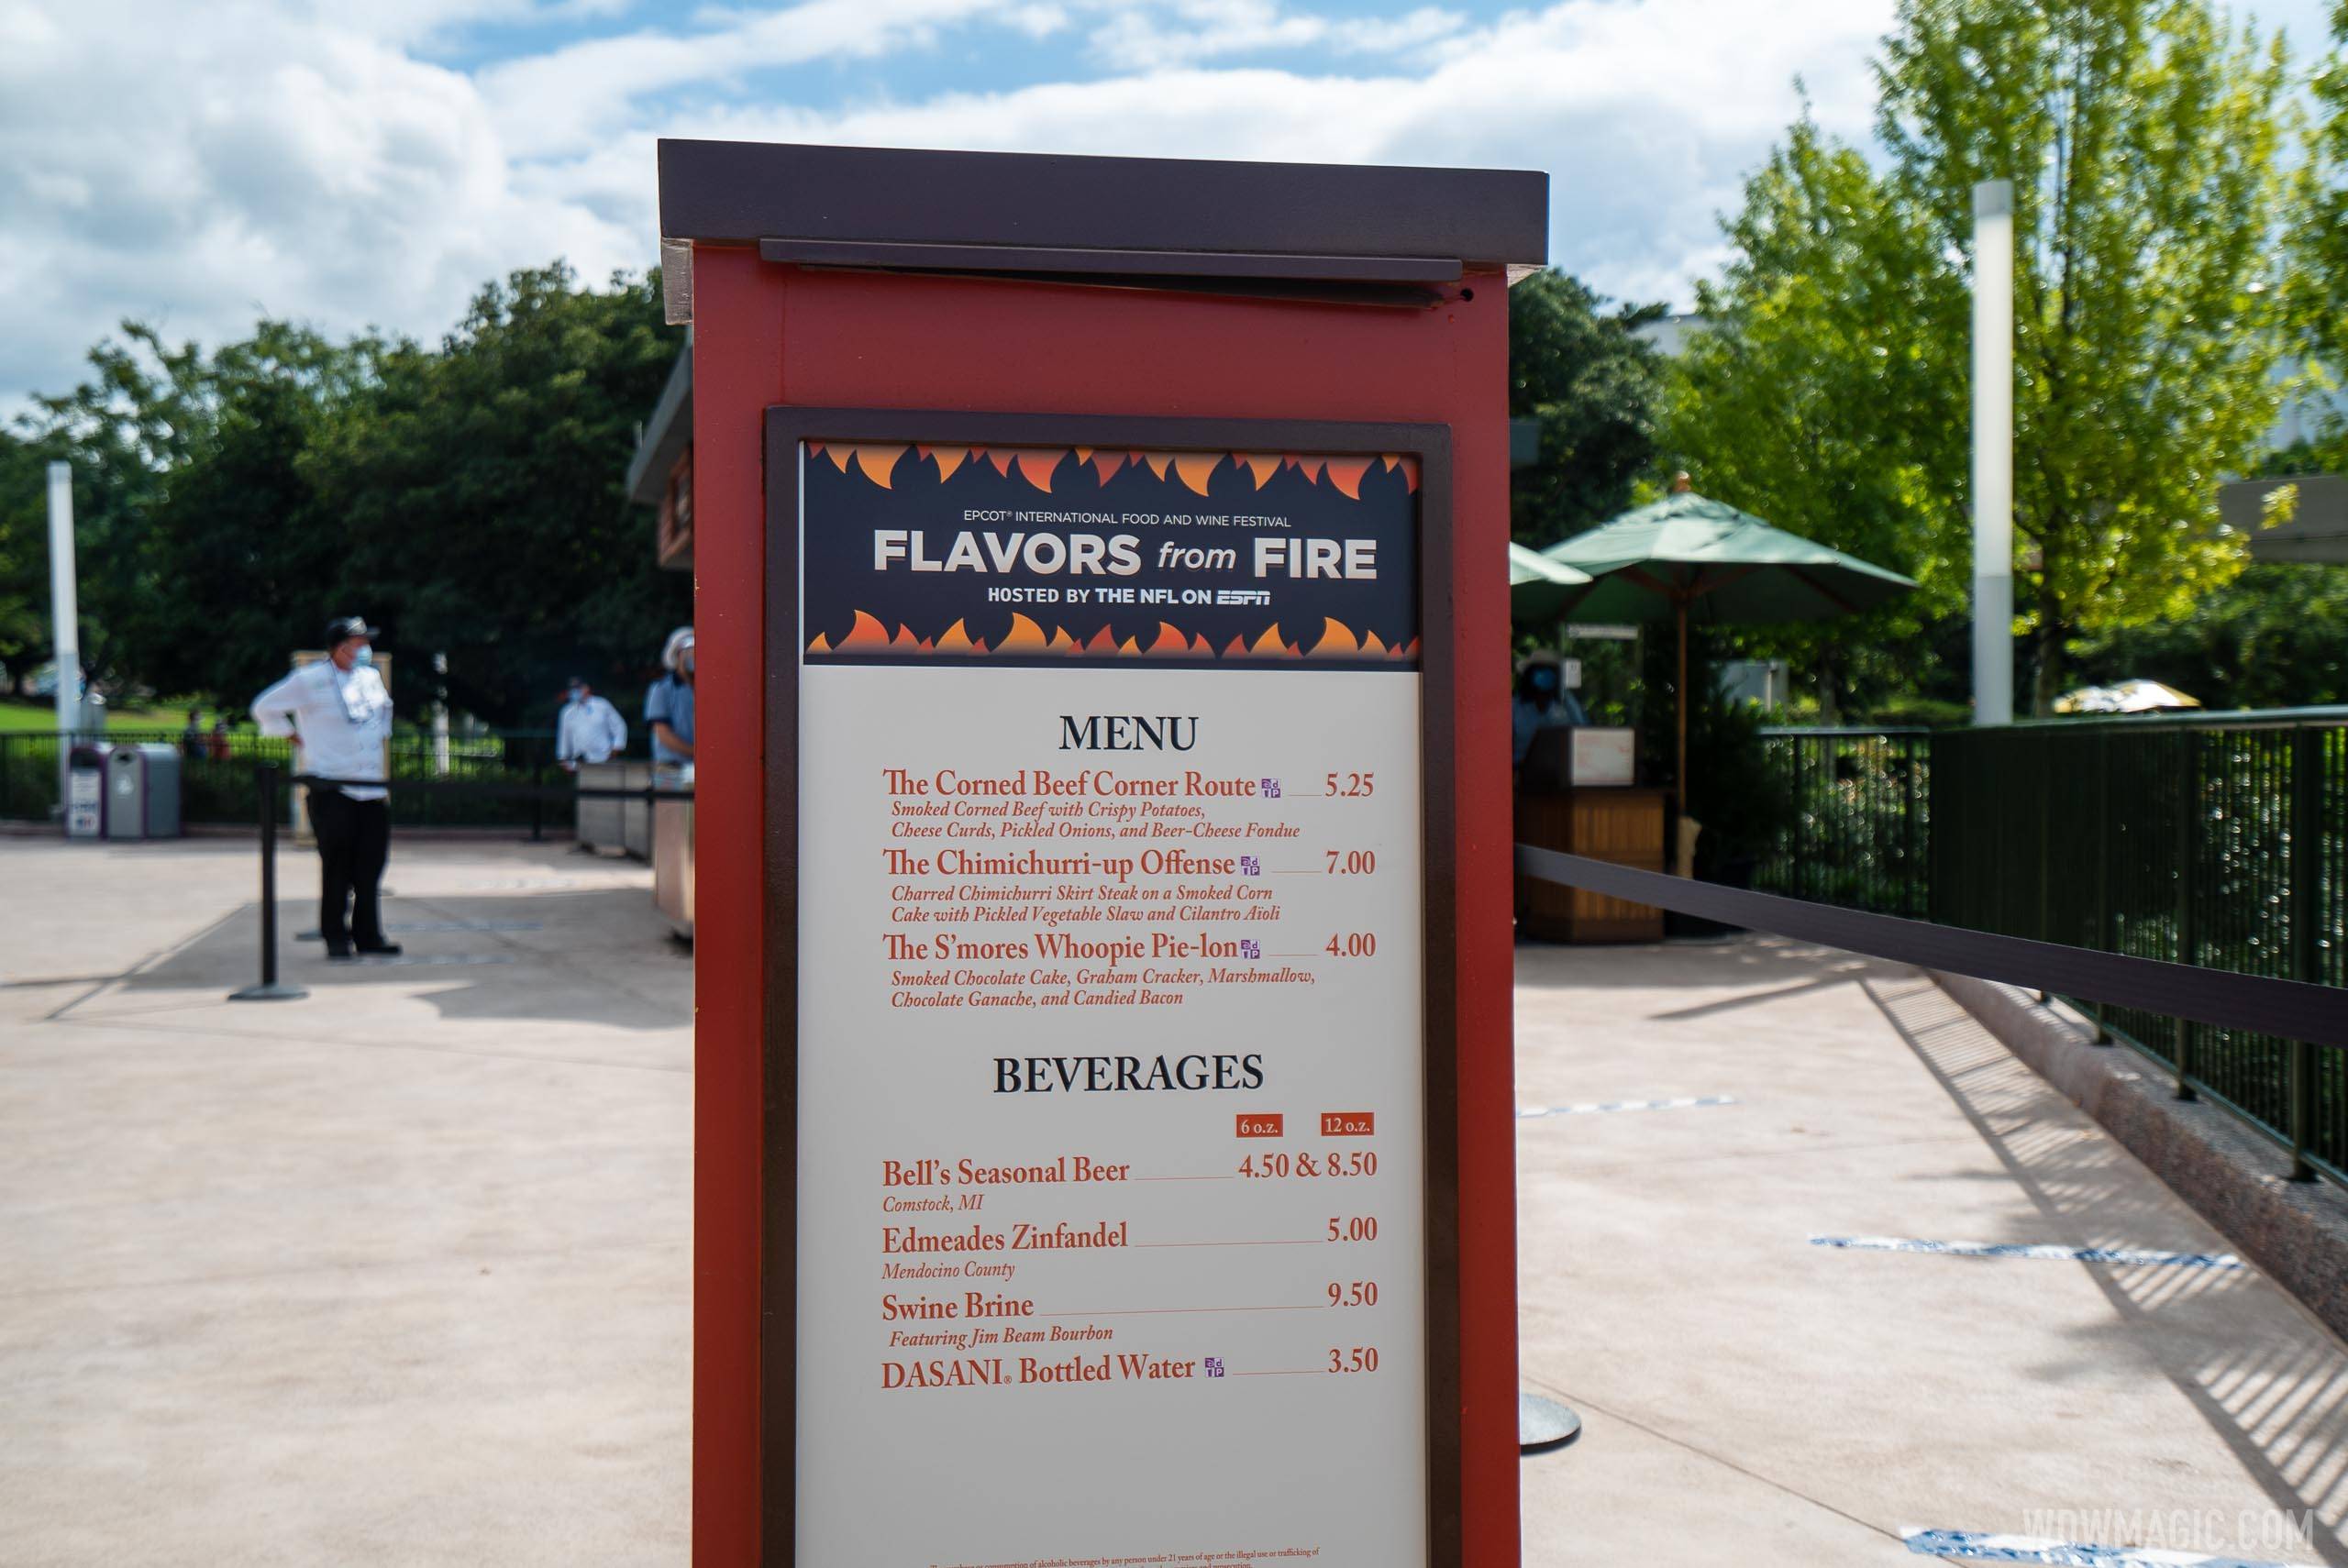 Flavors from Fire at 2020 Taste of EPCOT International Food and Wine Festival